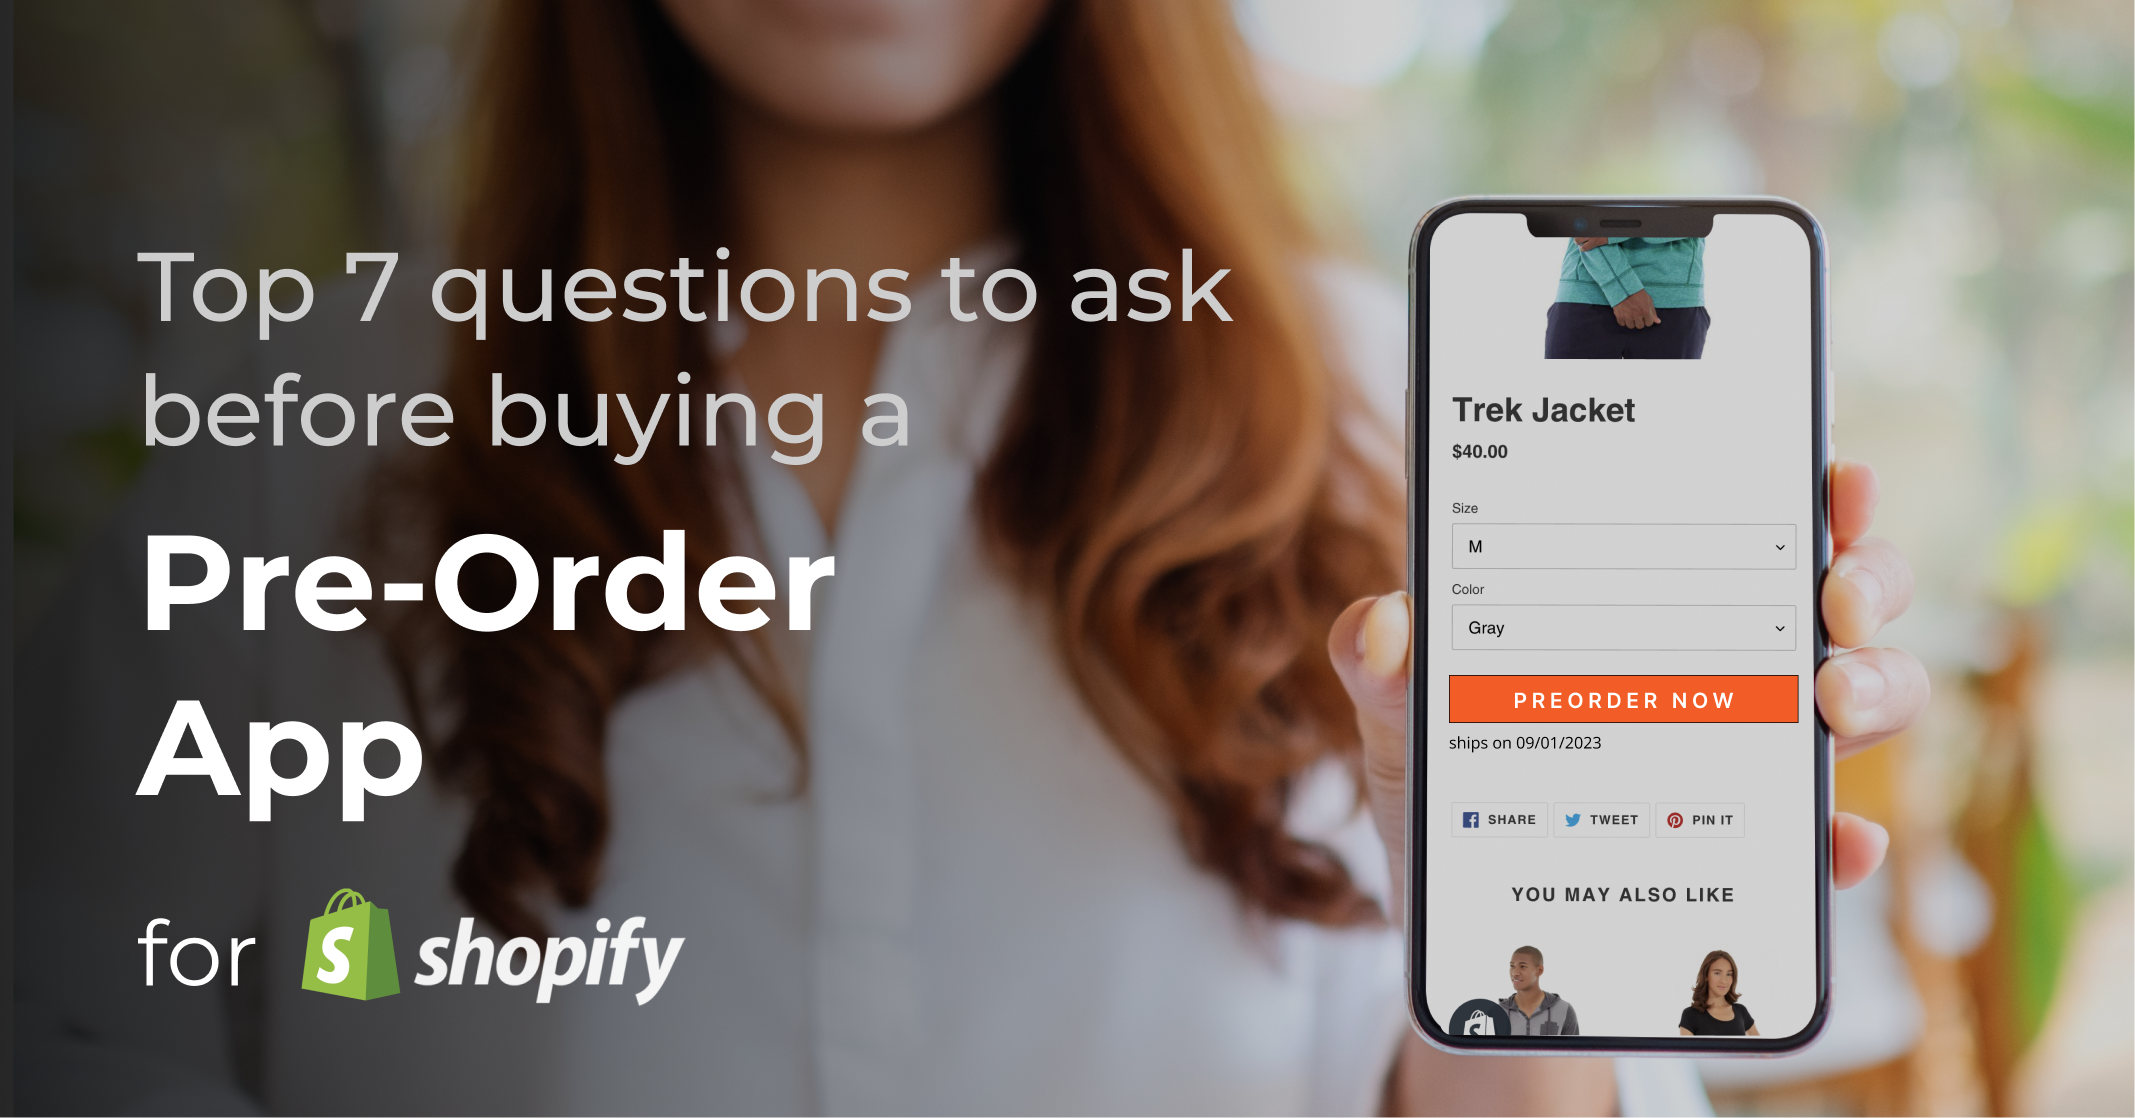 Top 7 Questions to Ask Before Buying a Pre-Order App for Shopify